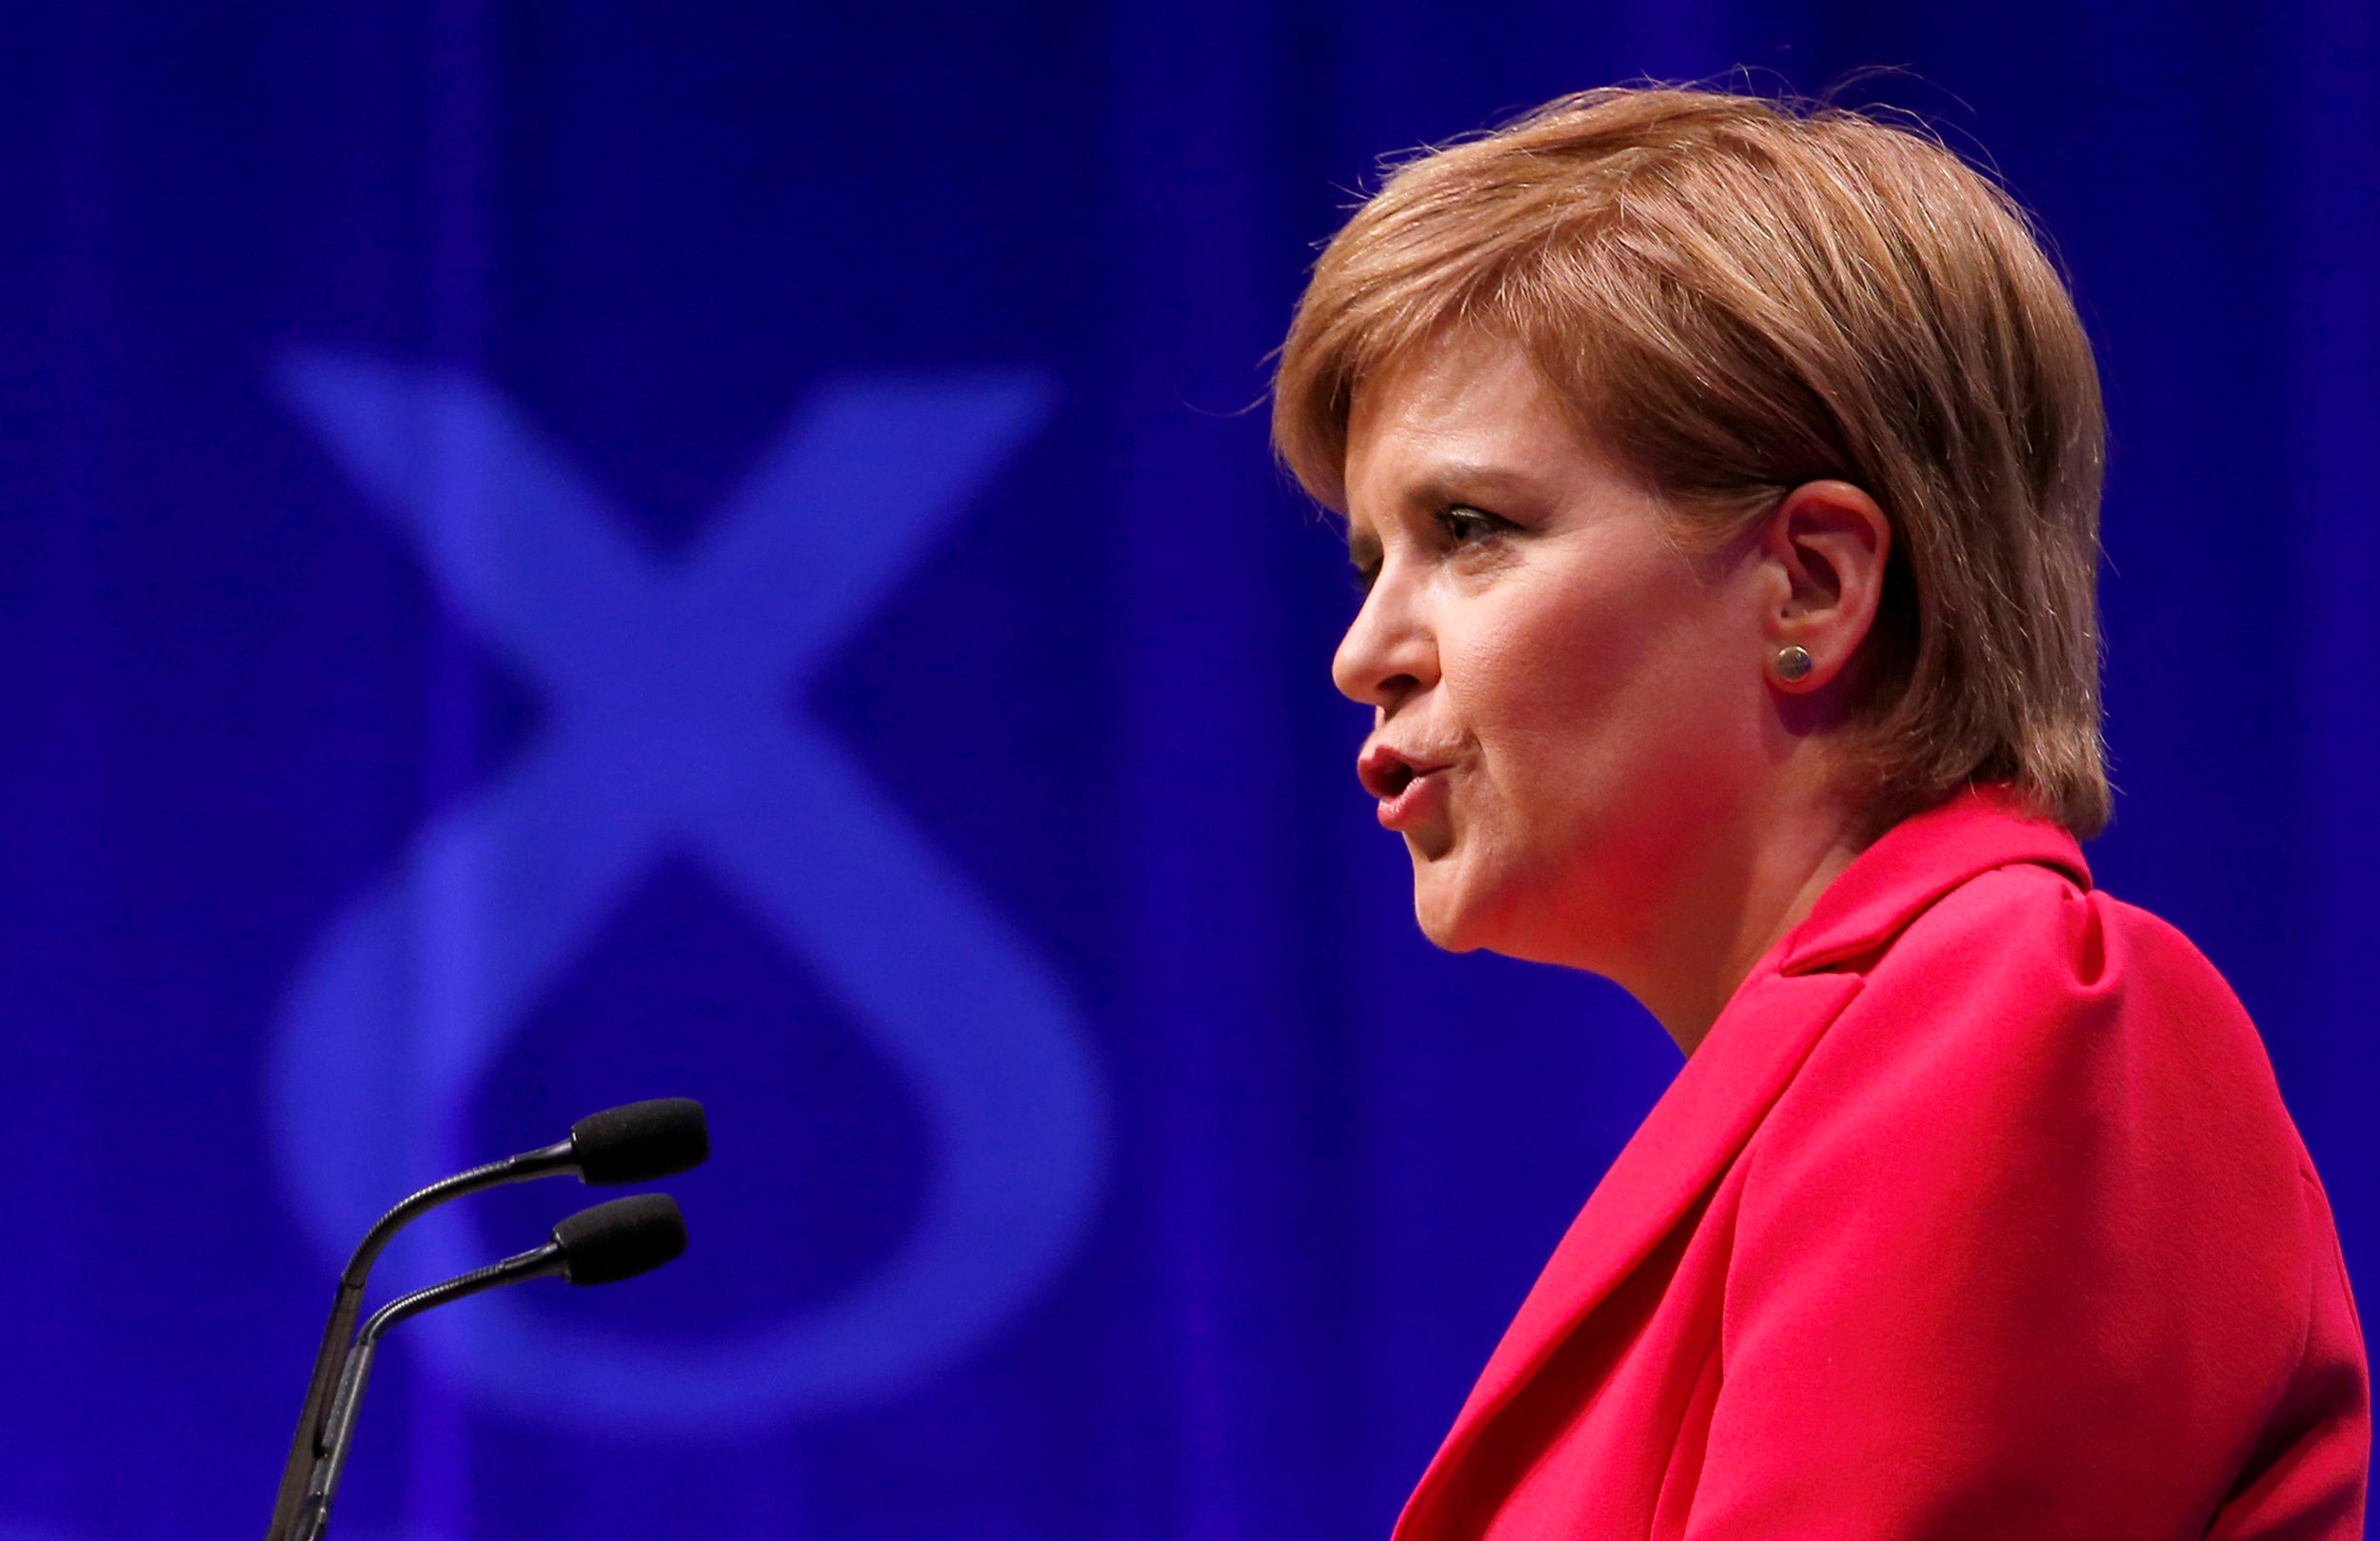 Nicola Sturgeon, Scotland's First Minister, has already ‘set her government on a collision course with Westminster’ over Brexit